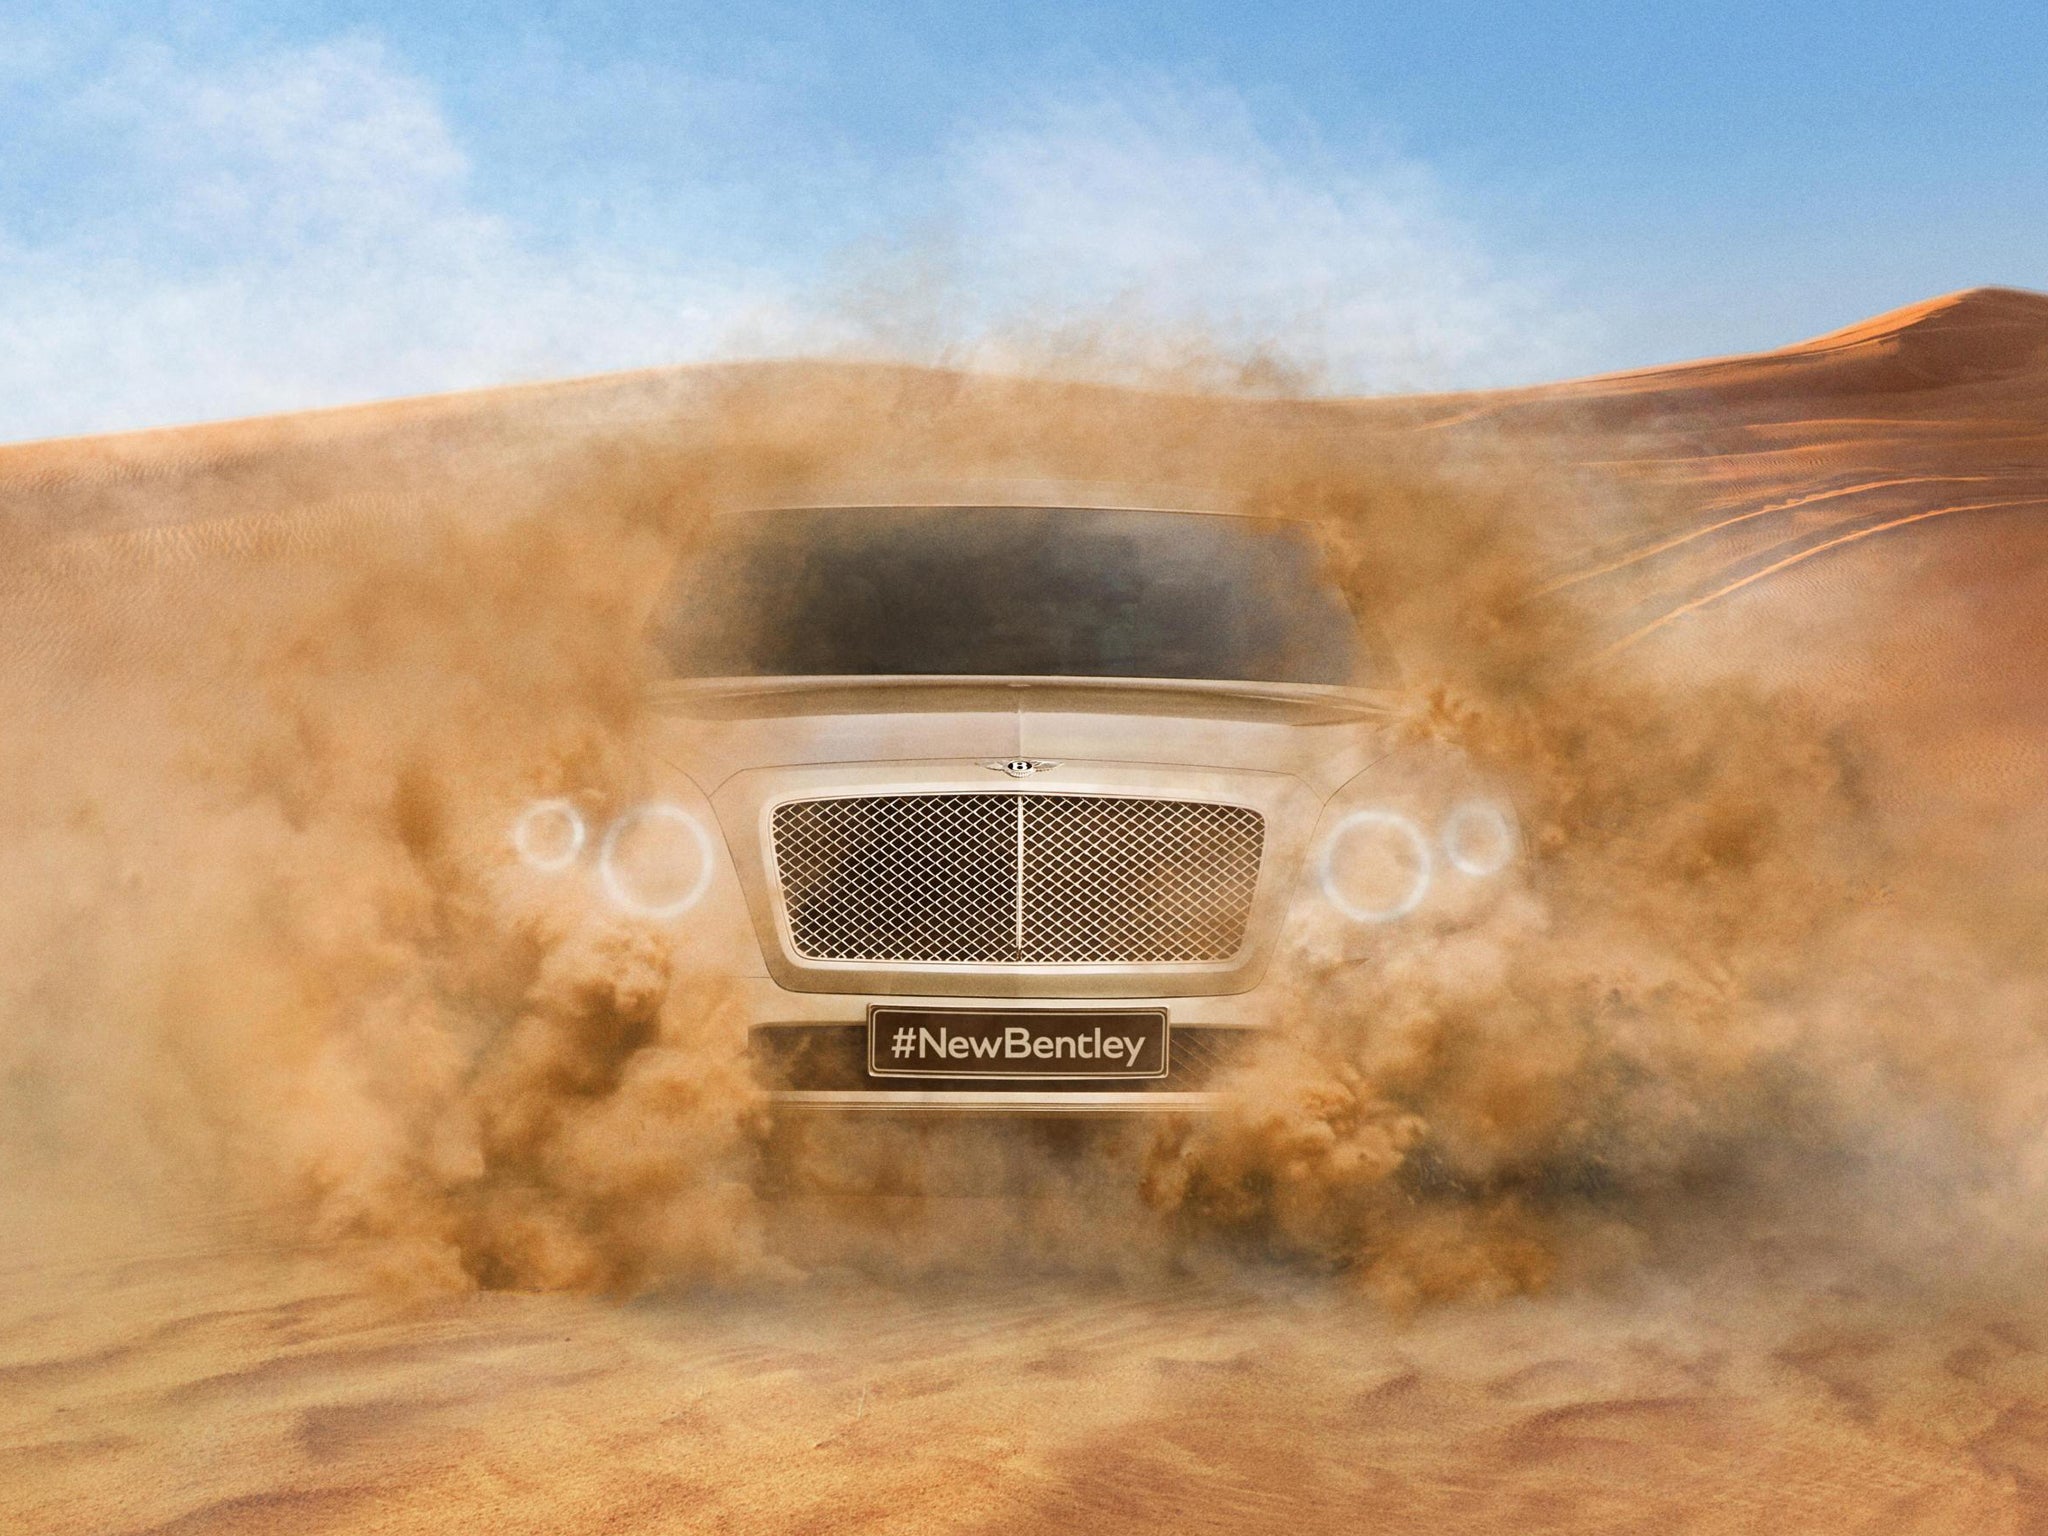 The first official picture of the new Bentley SUV